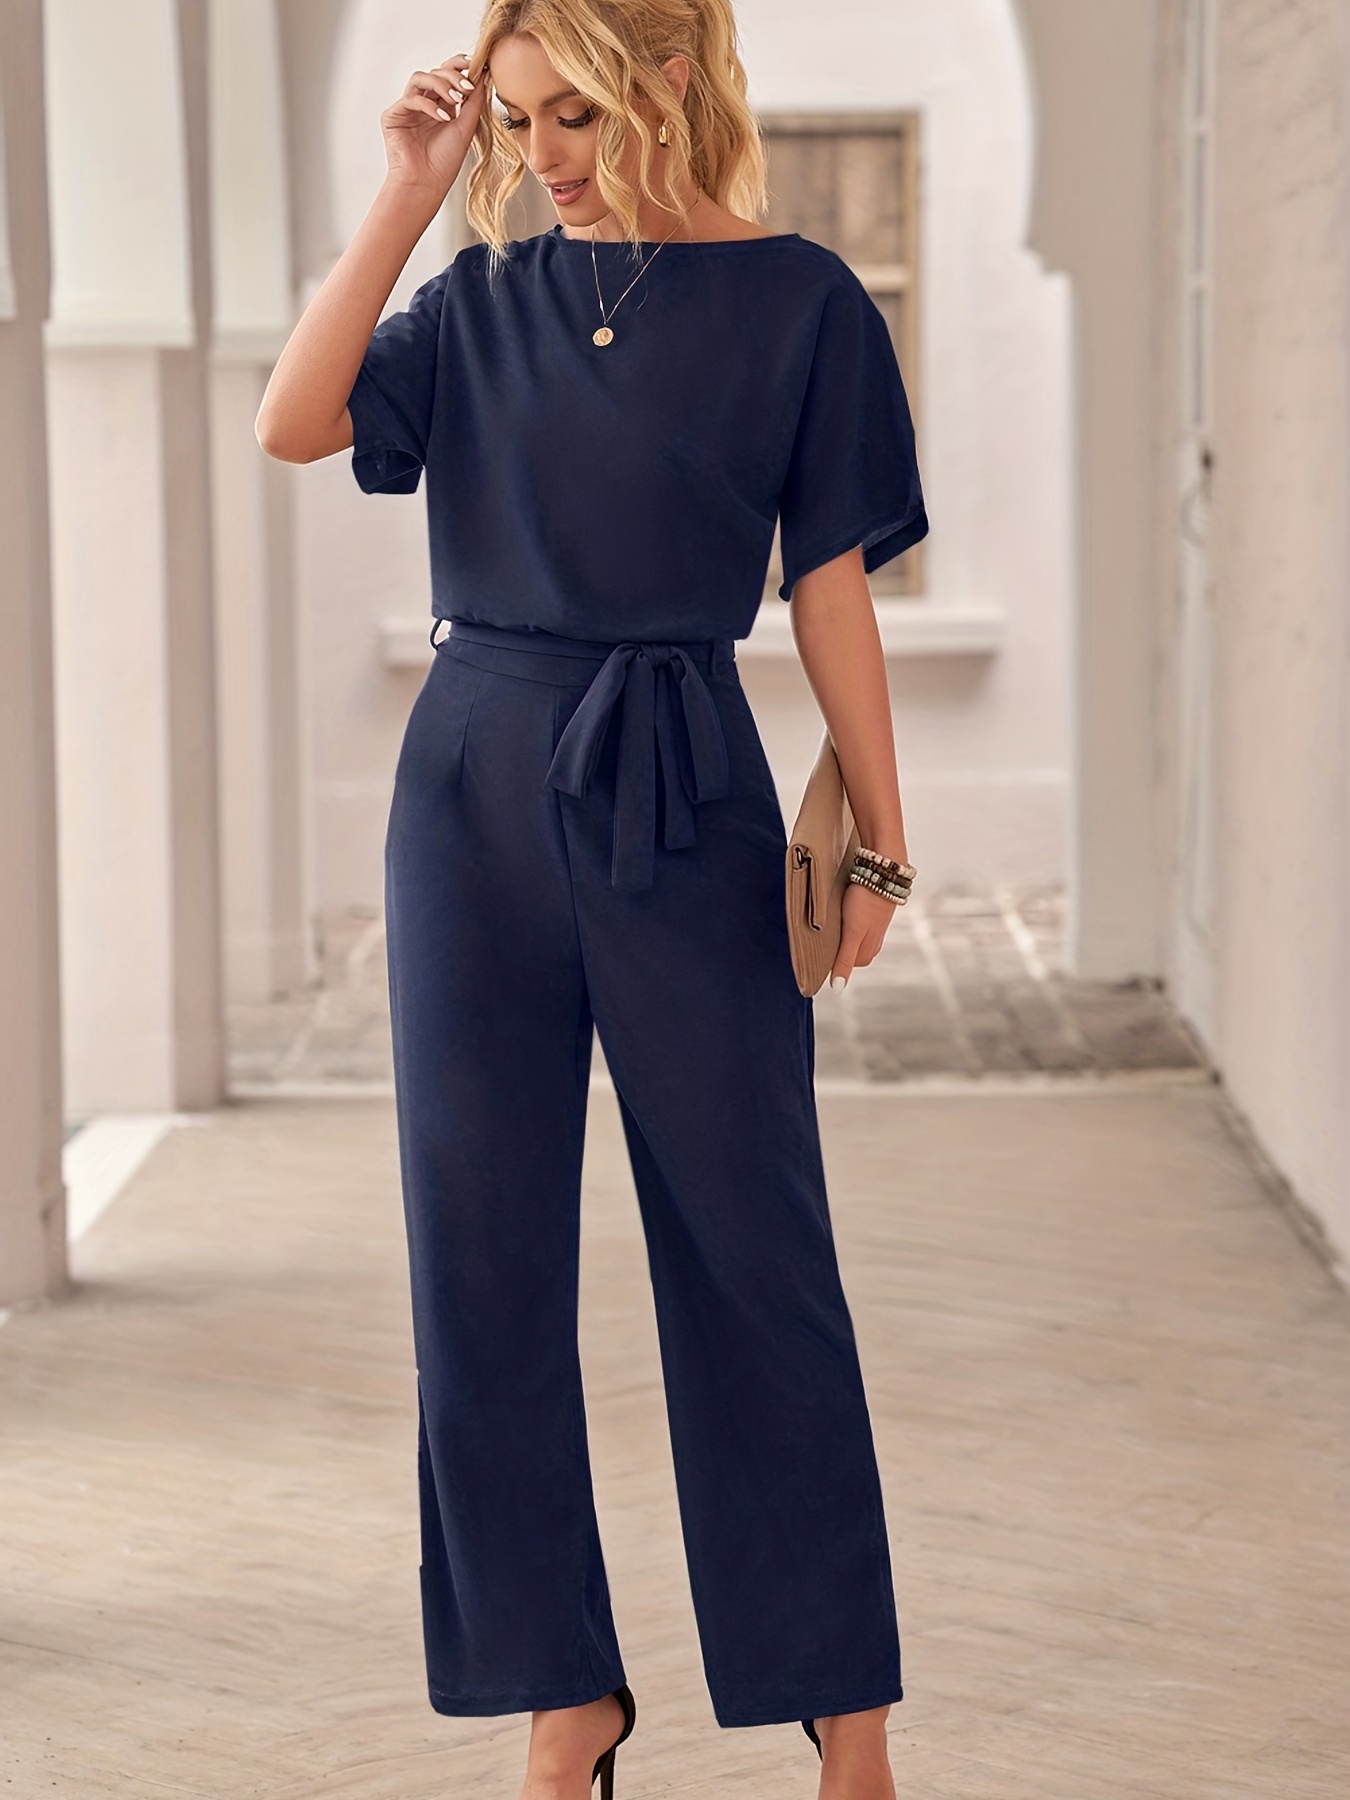 Daytrip Knit Jogger Jumpsuit - Women's Rompers/Jumpsuits in Navy | Buckle